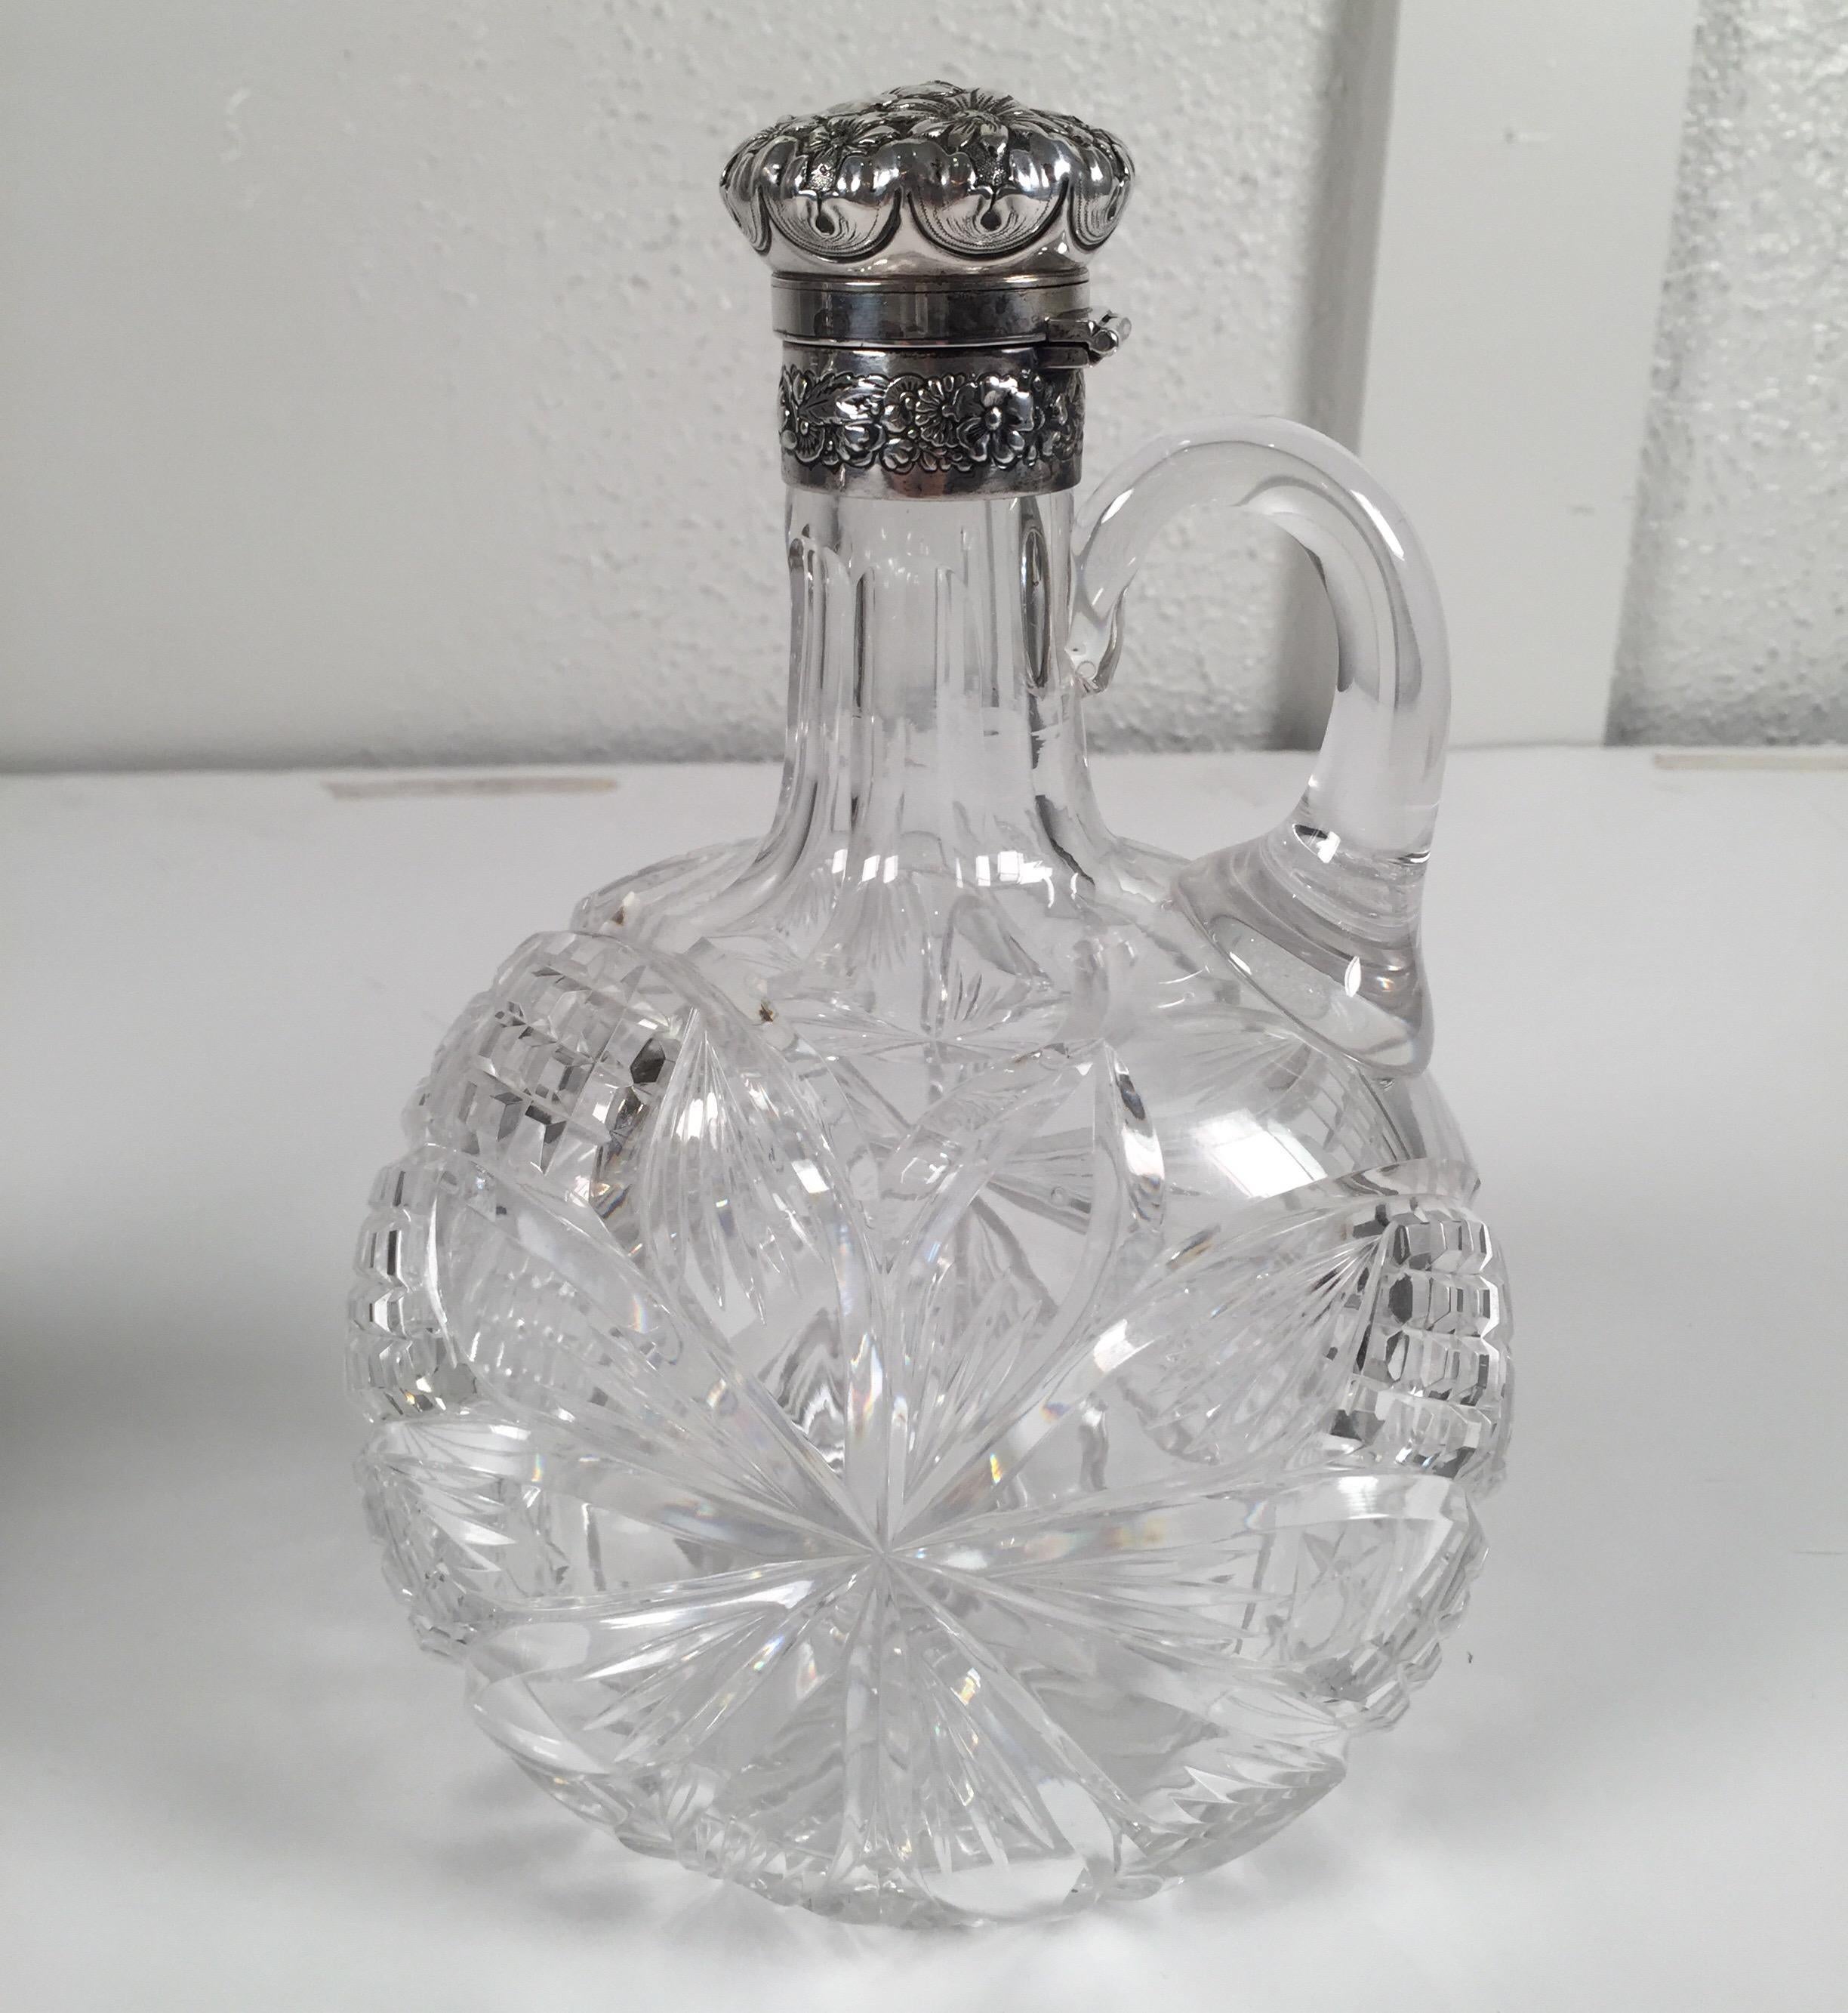 A pair of sterling mounted cut glass decanters with handles. The jug form with exceptional cutting in American brilliant glass attributed to Hawkes. The Gorham hallmarked sterling repousse lids which lock and unlock by turning the caps.